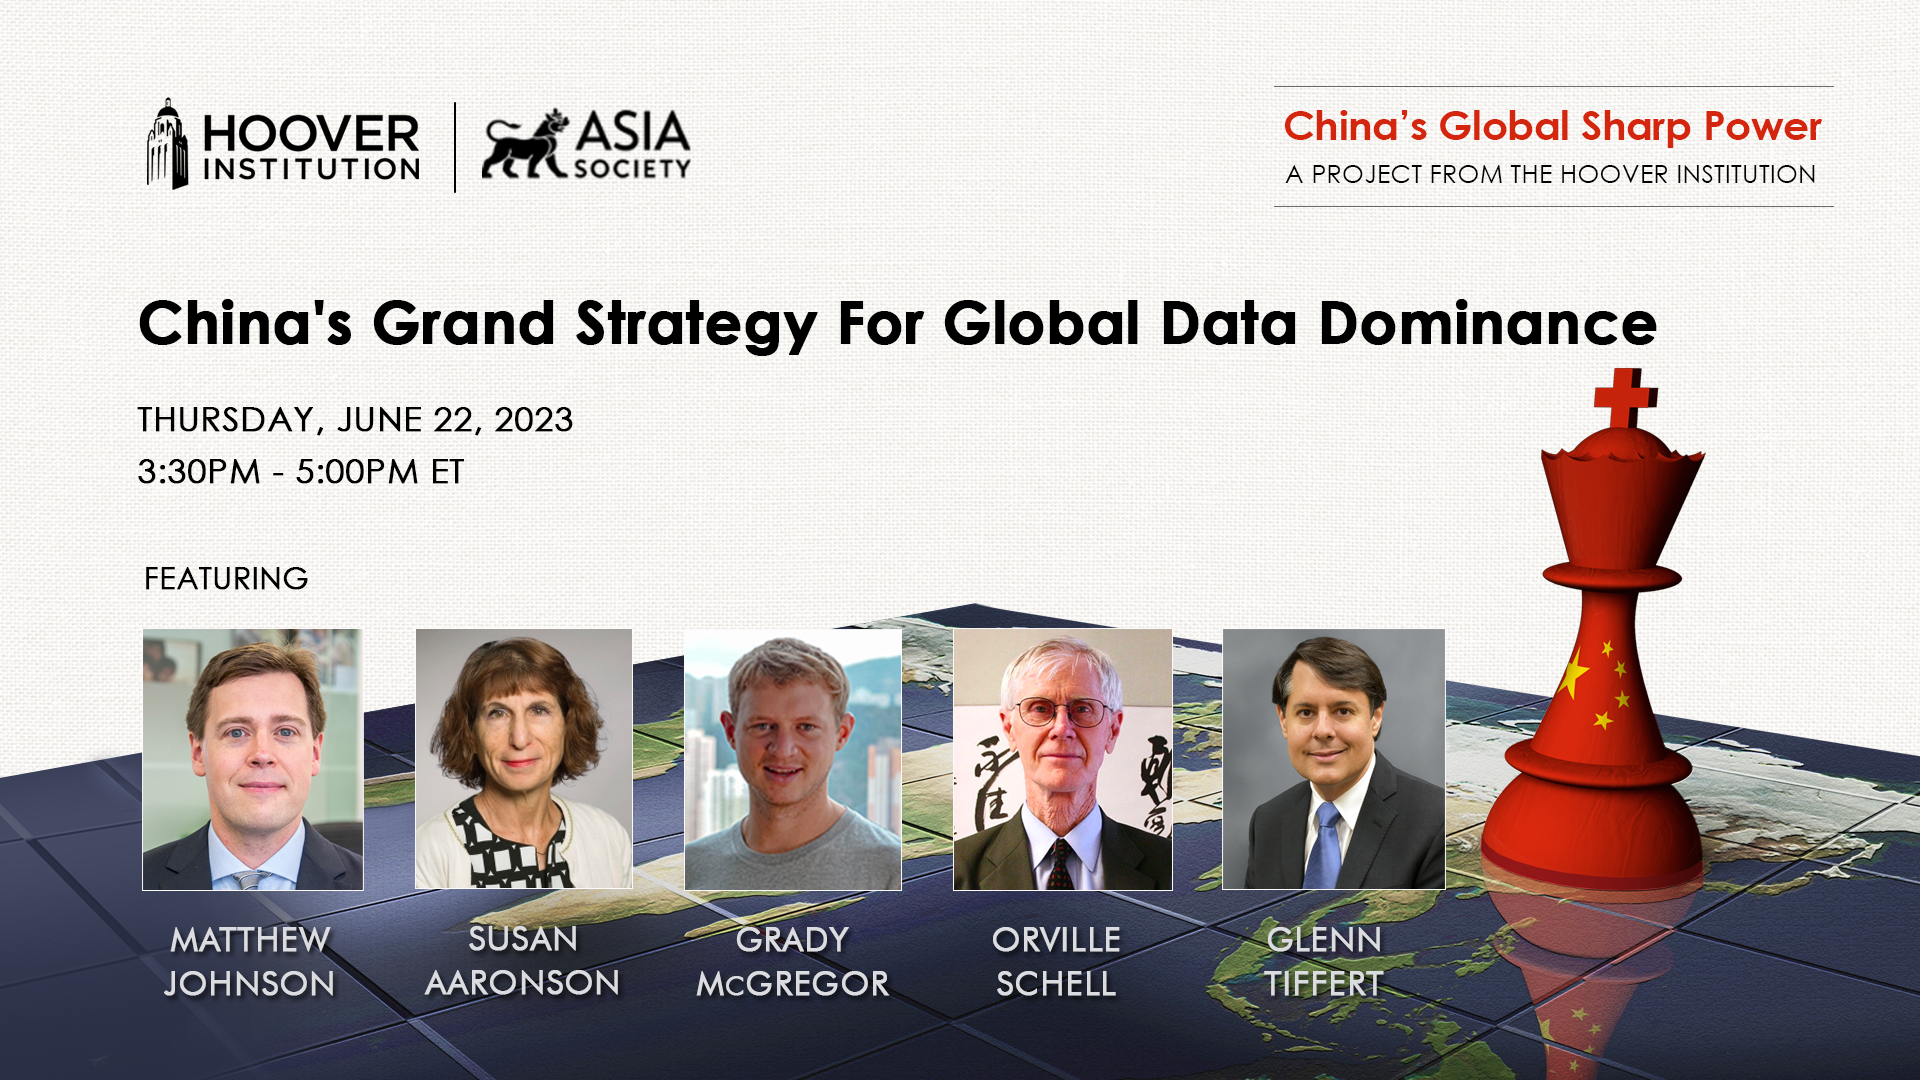 China's Grand Strategy For Global Data Dominance